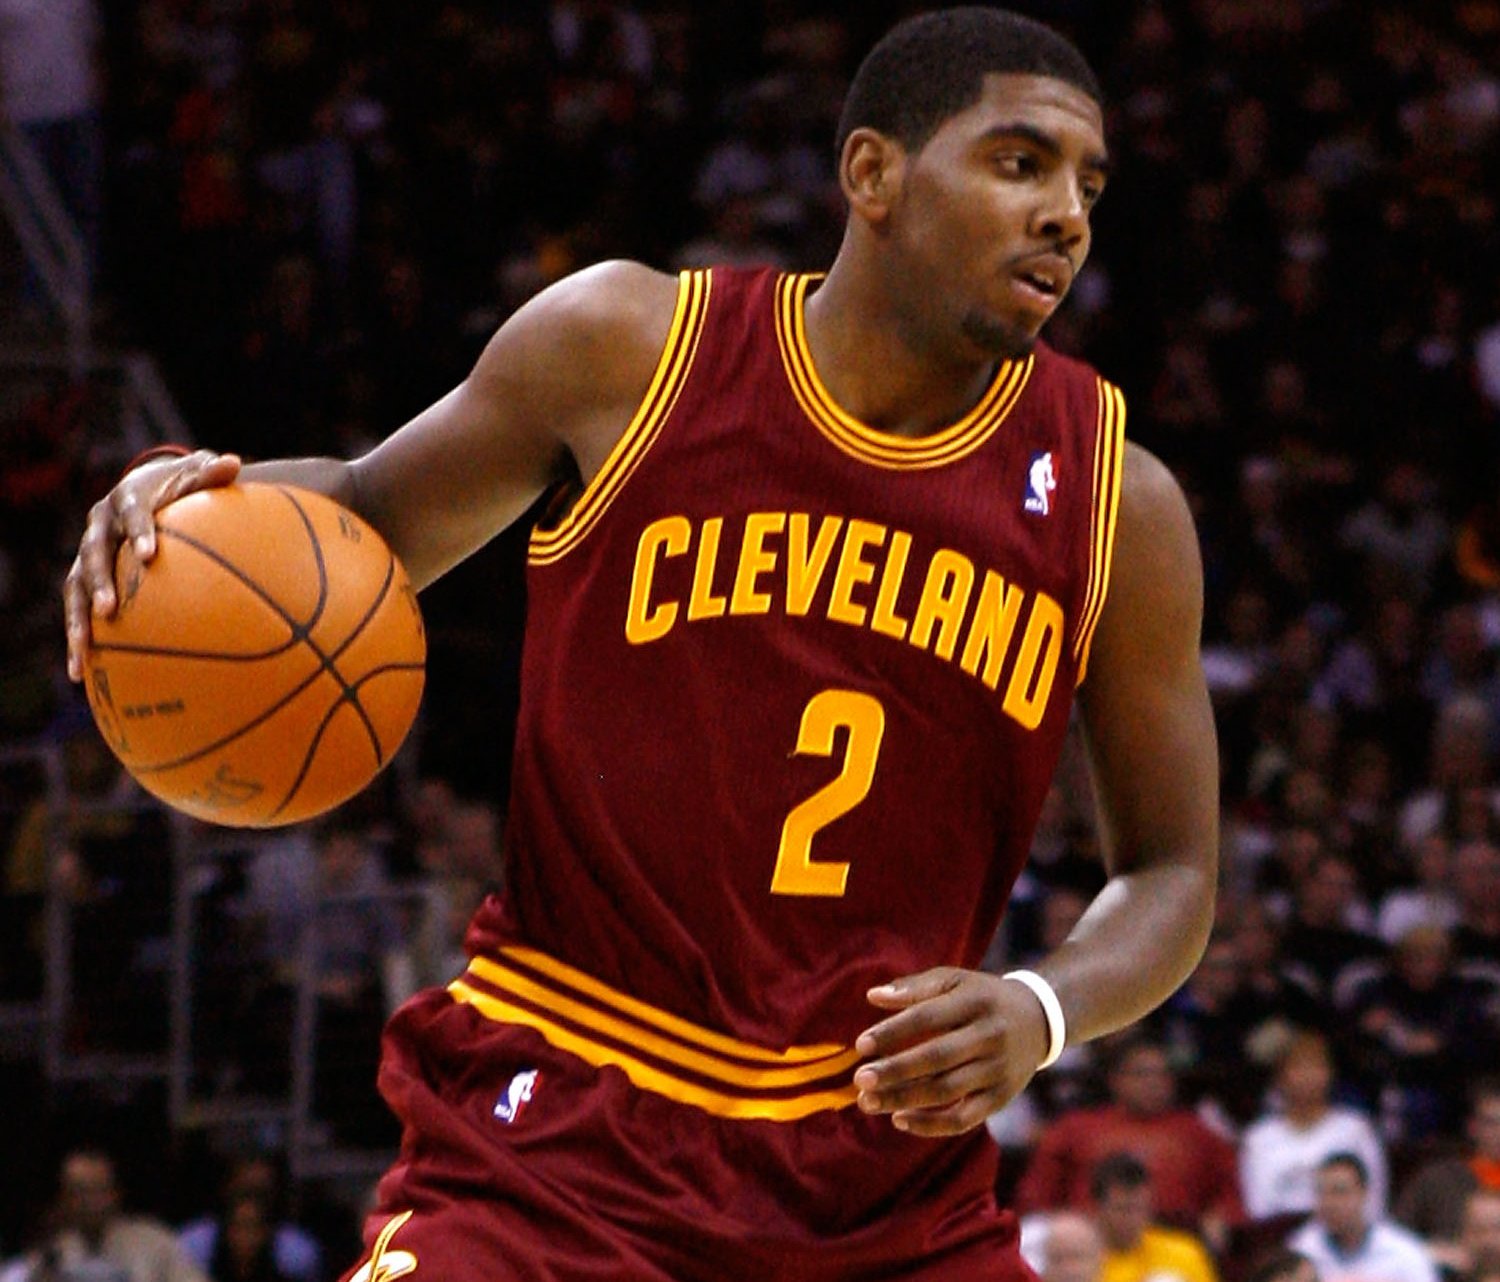 Cleveland Cavaliers: Kyrie Irving Closes out Oklahoma City Thunder | Bleacher Report